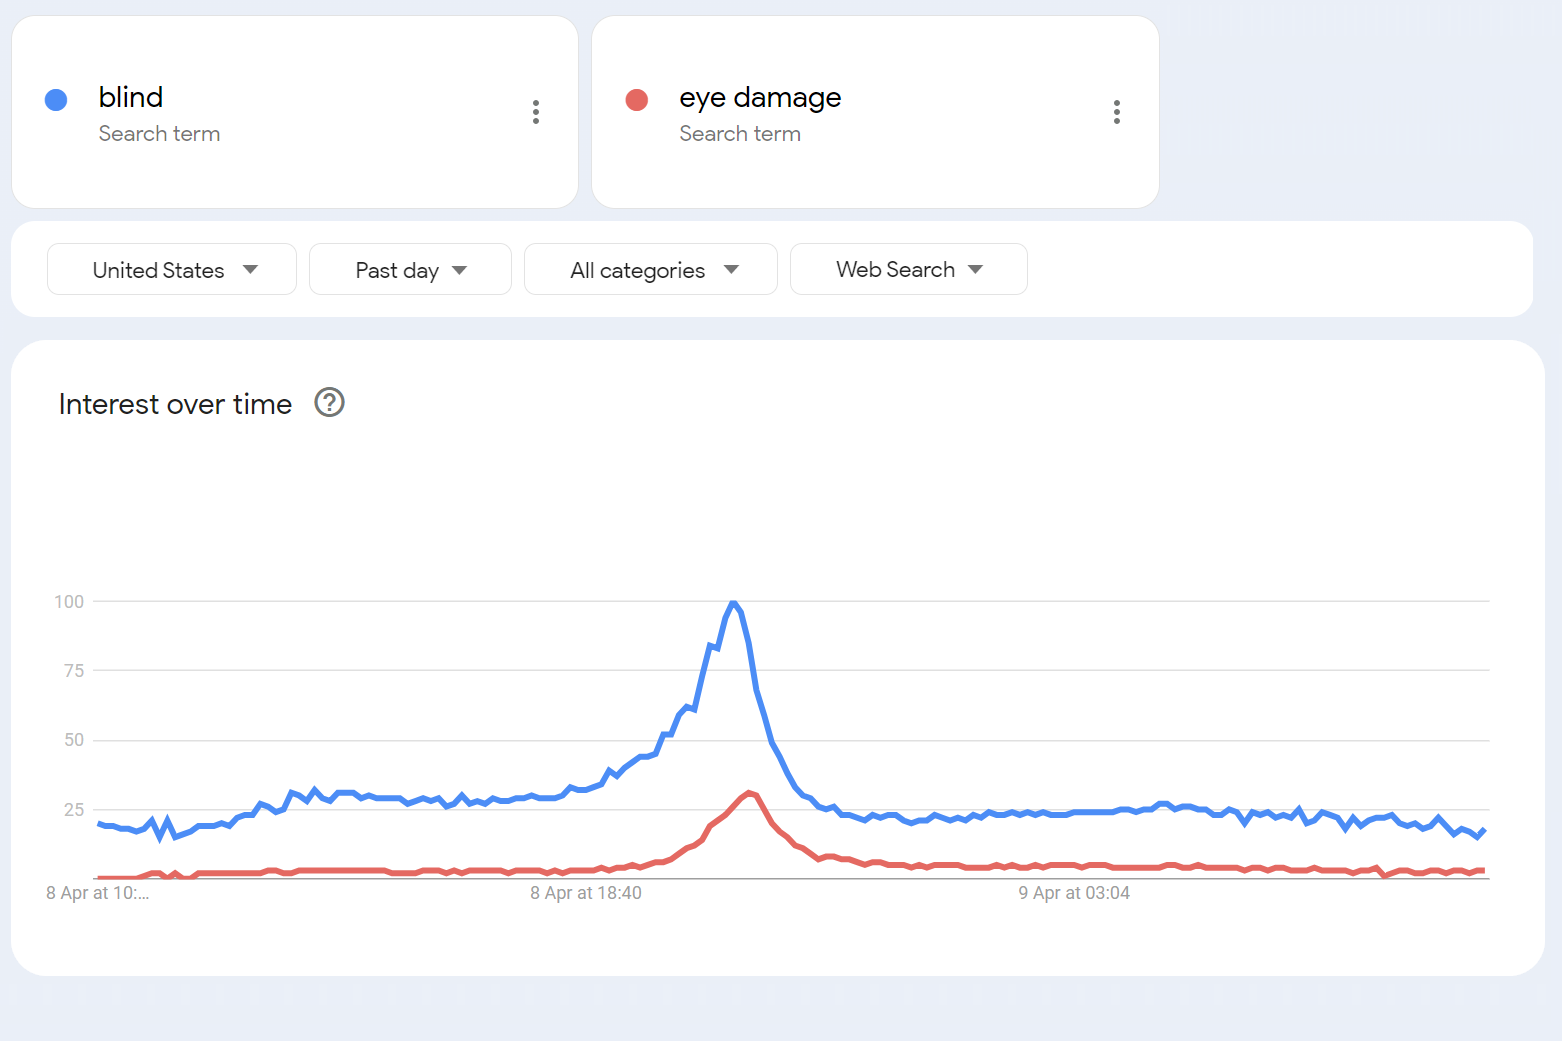 Search interest for ‘blind’ and eye damage’ spiked in the US following the solar eclipse on 8 April, 2024